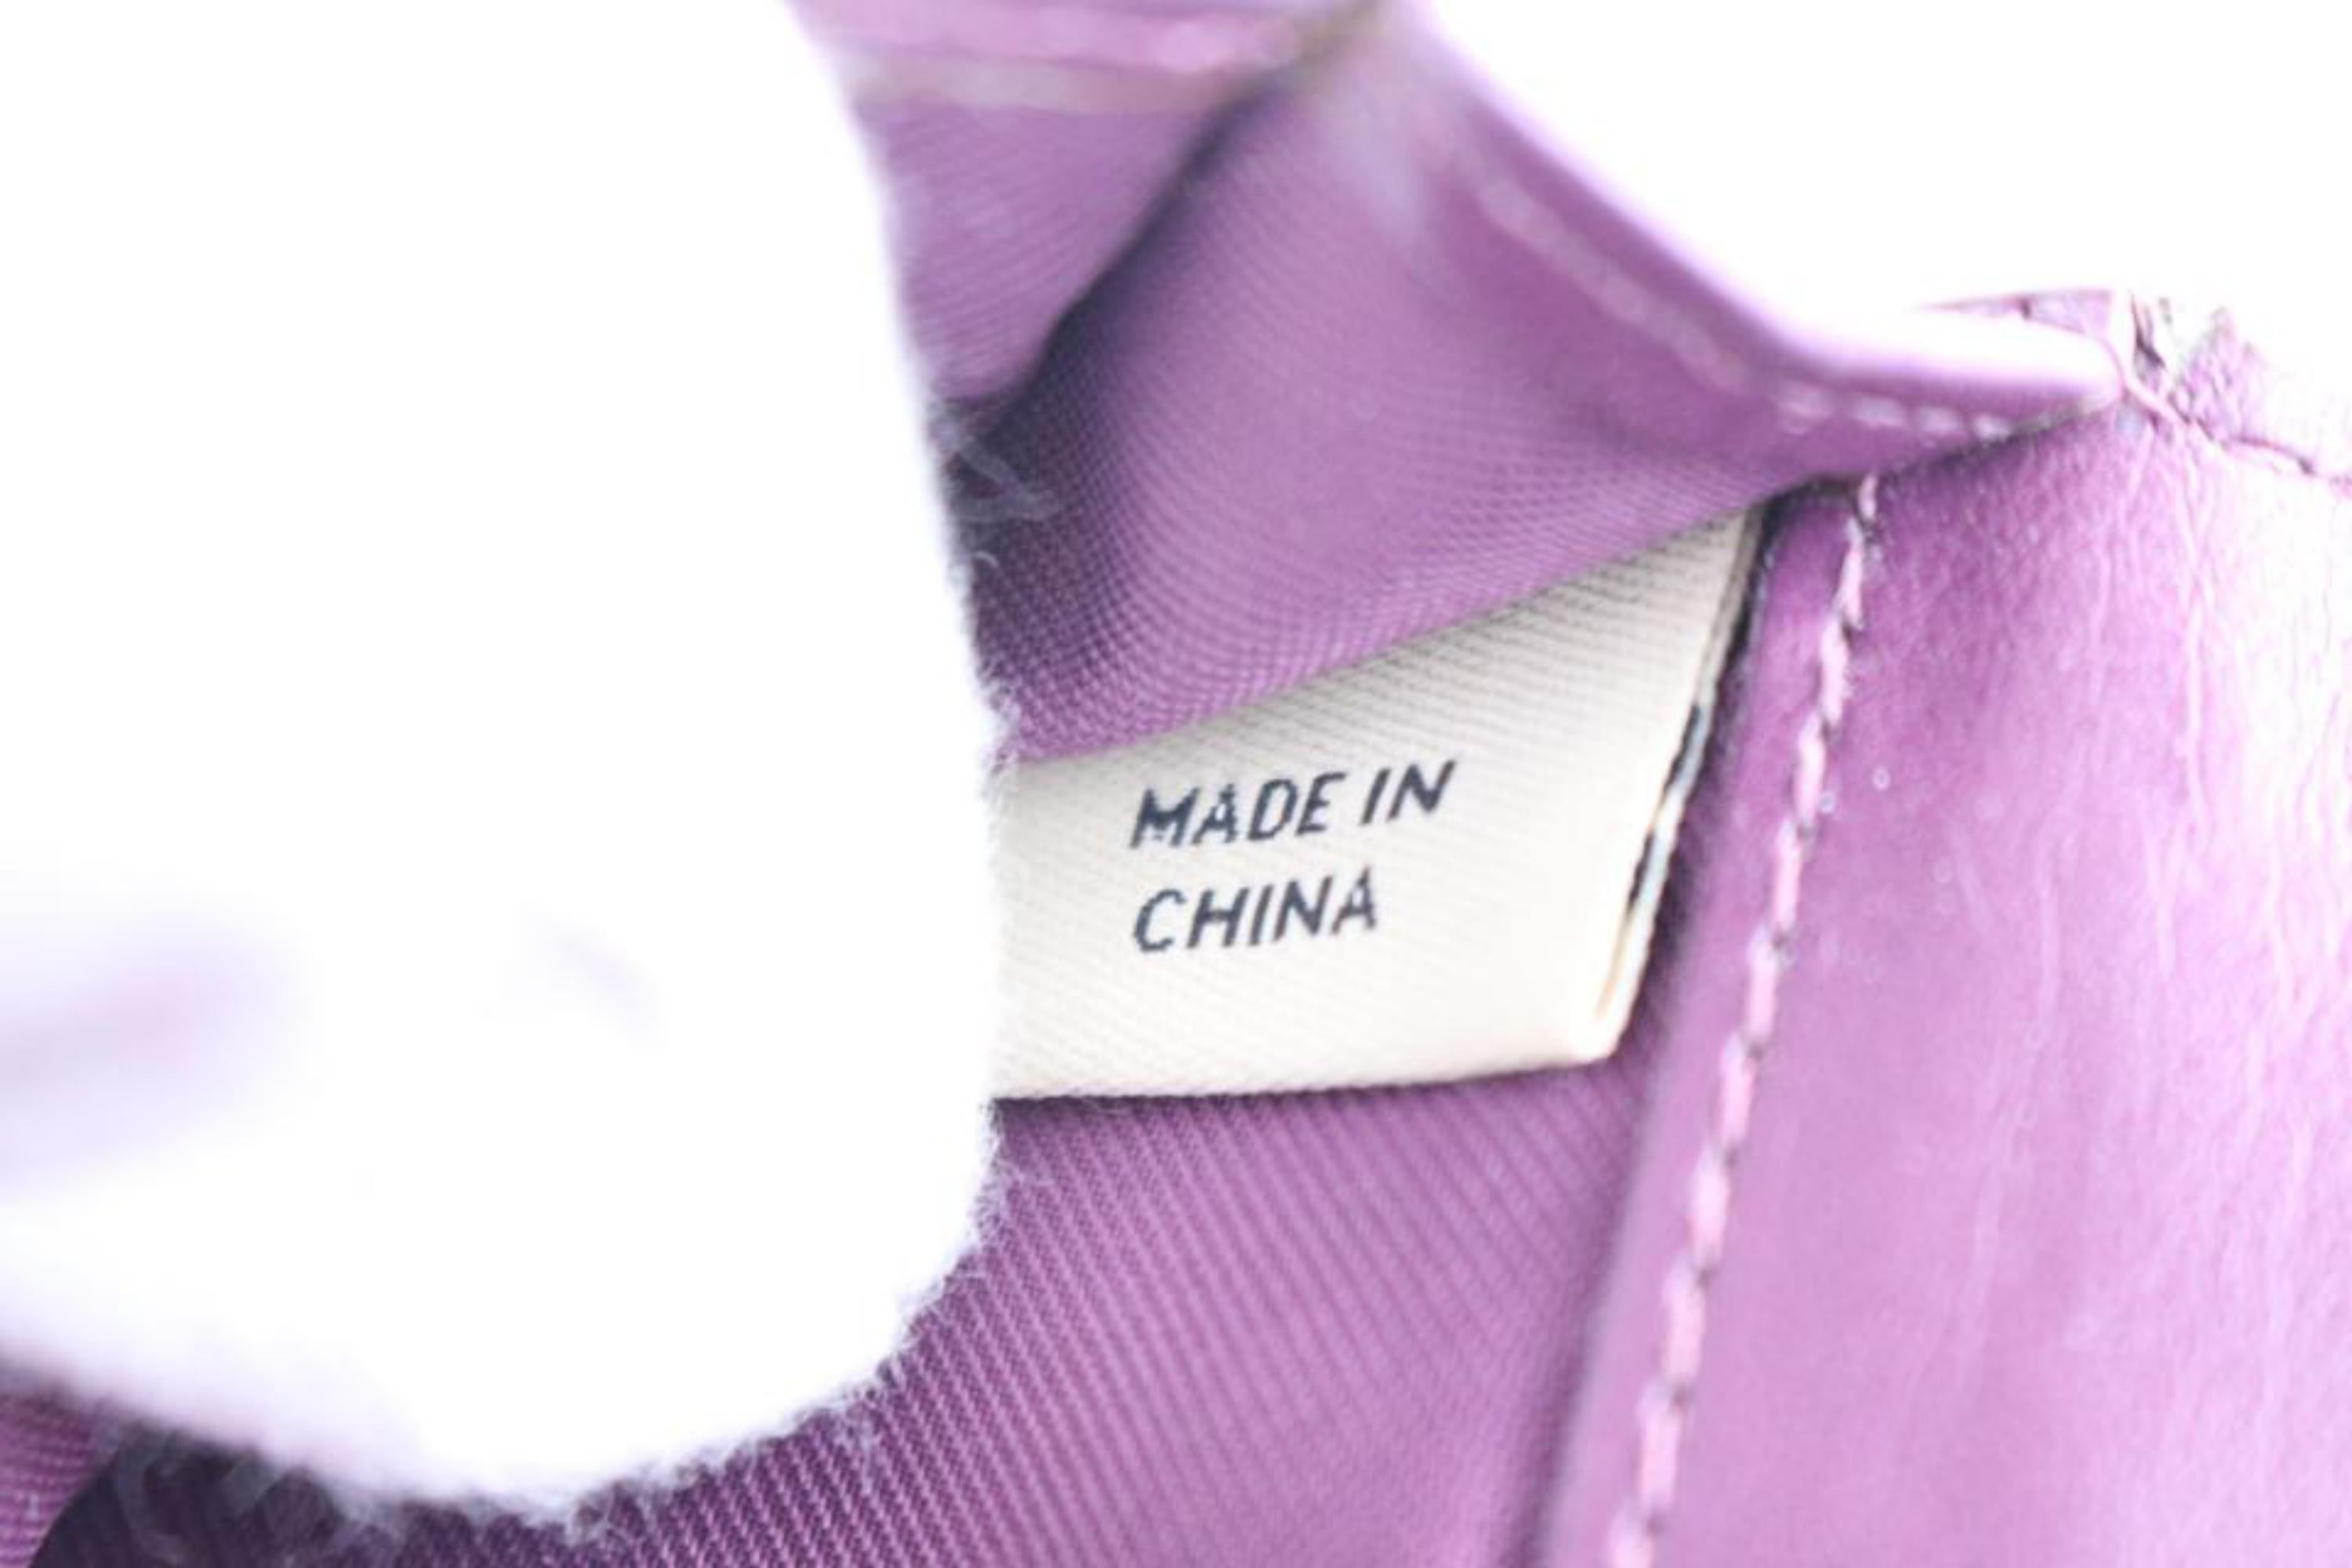 Made In: China
Measurements: Length: 7.25